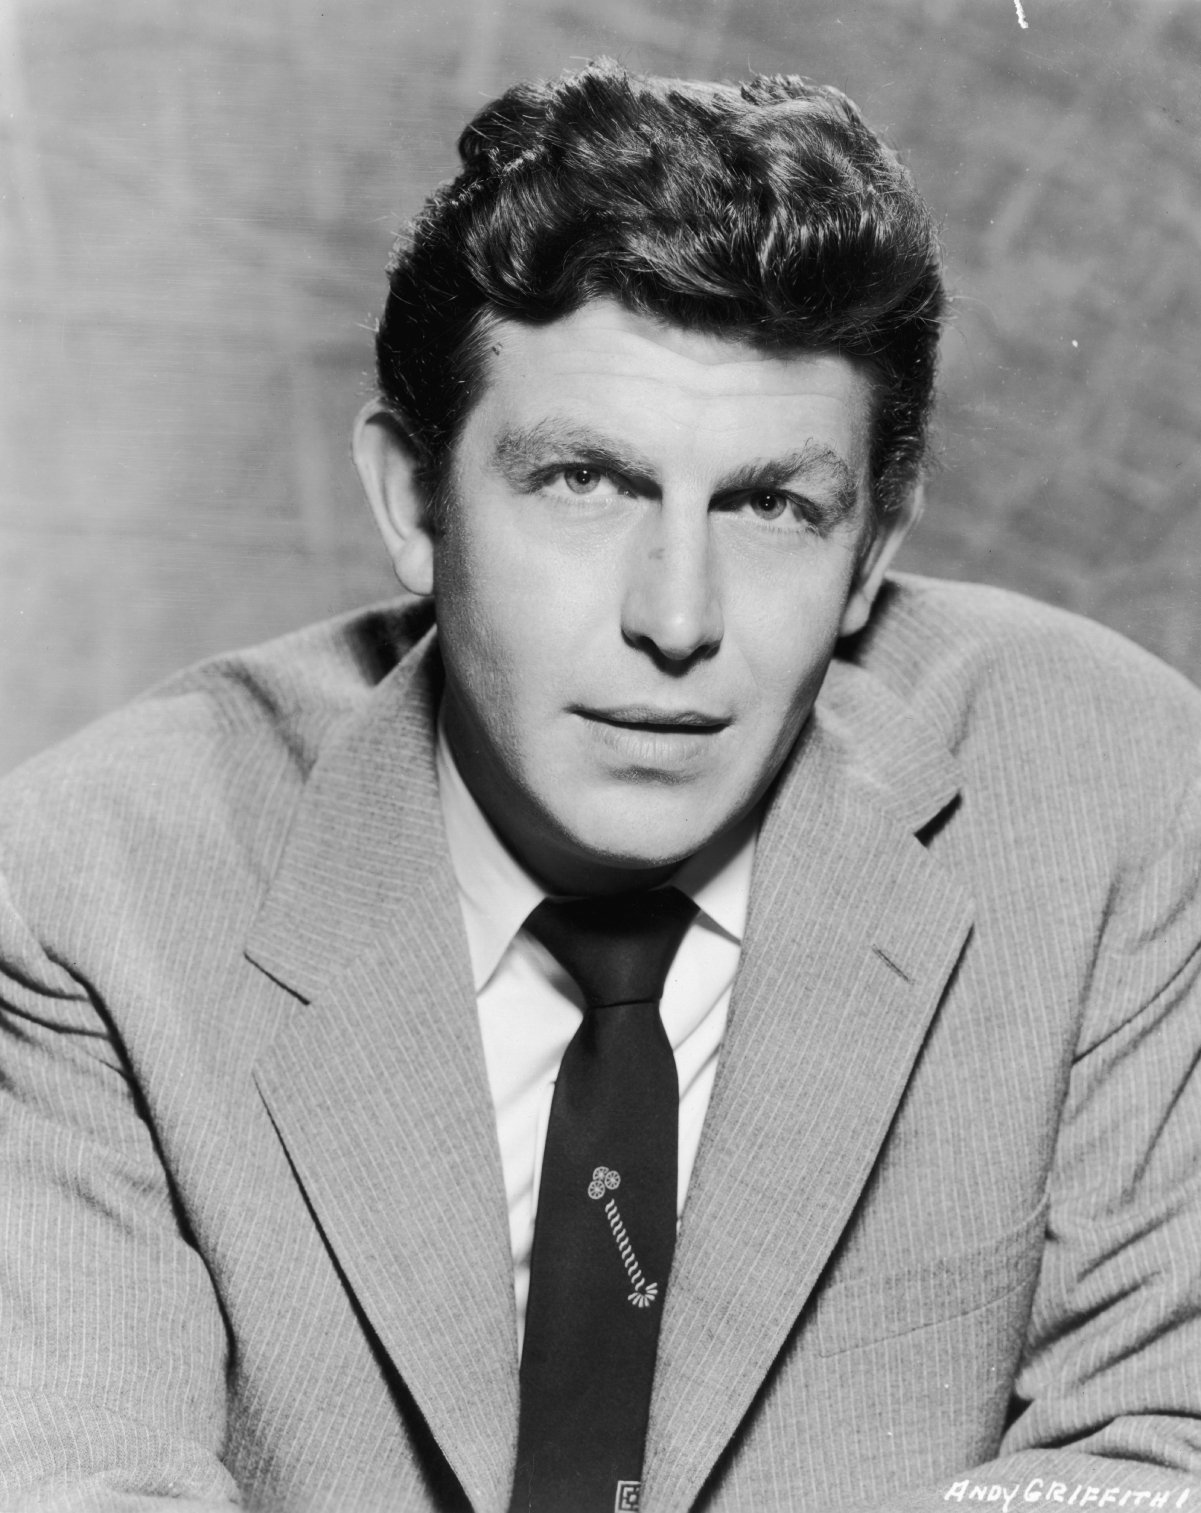 Promotional headshot portrait of actor Andy Griffith in 1958